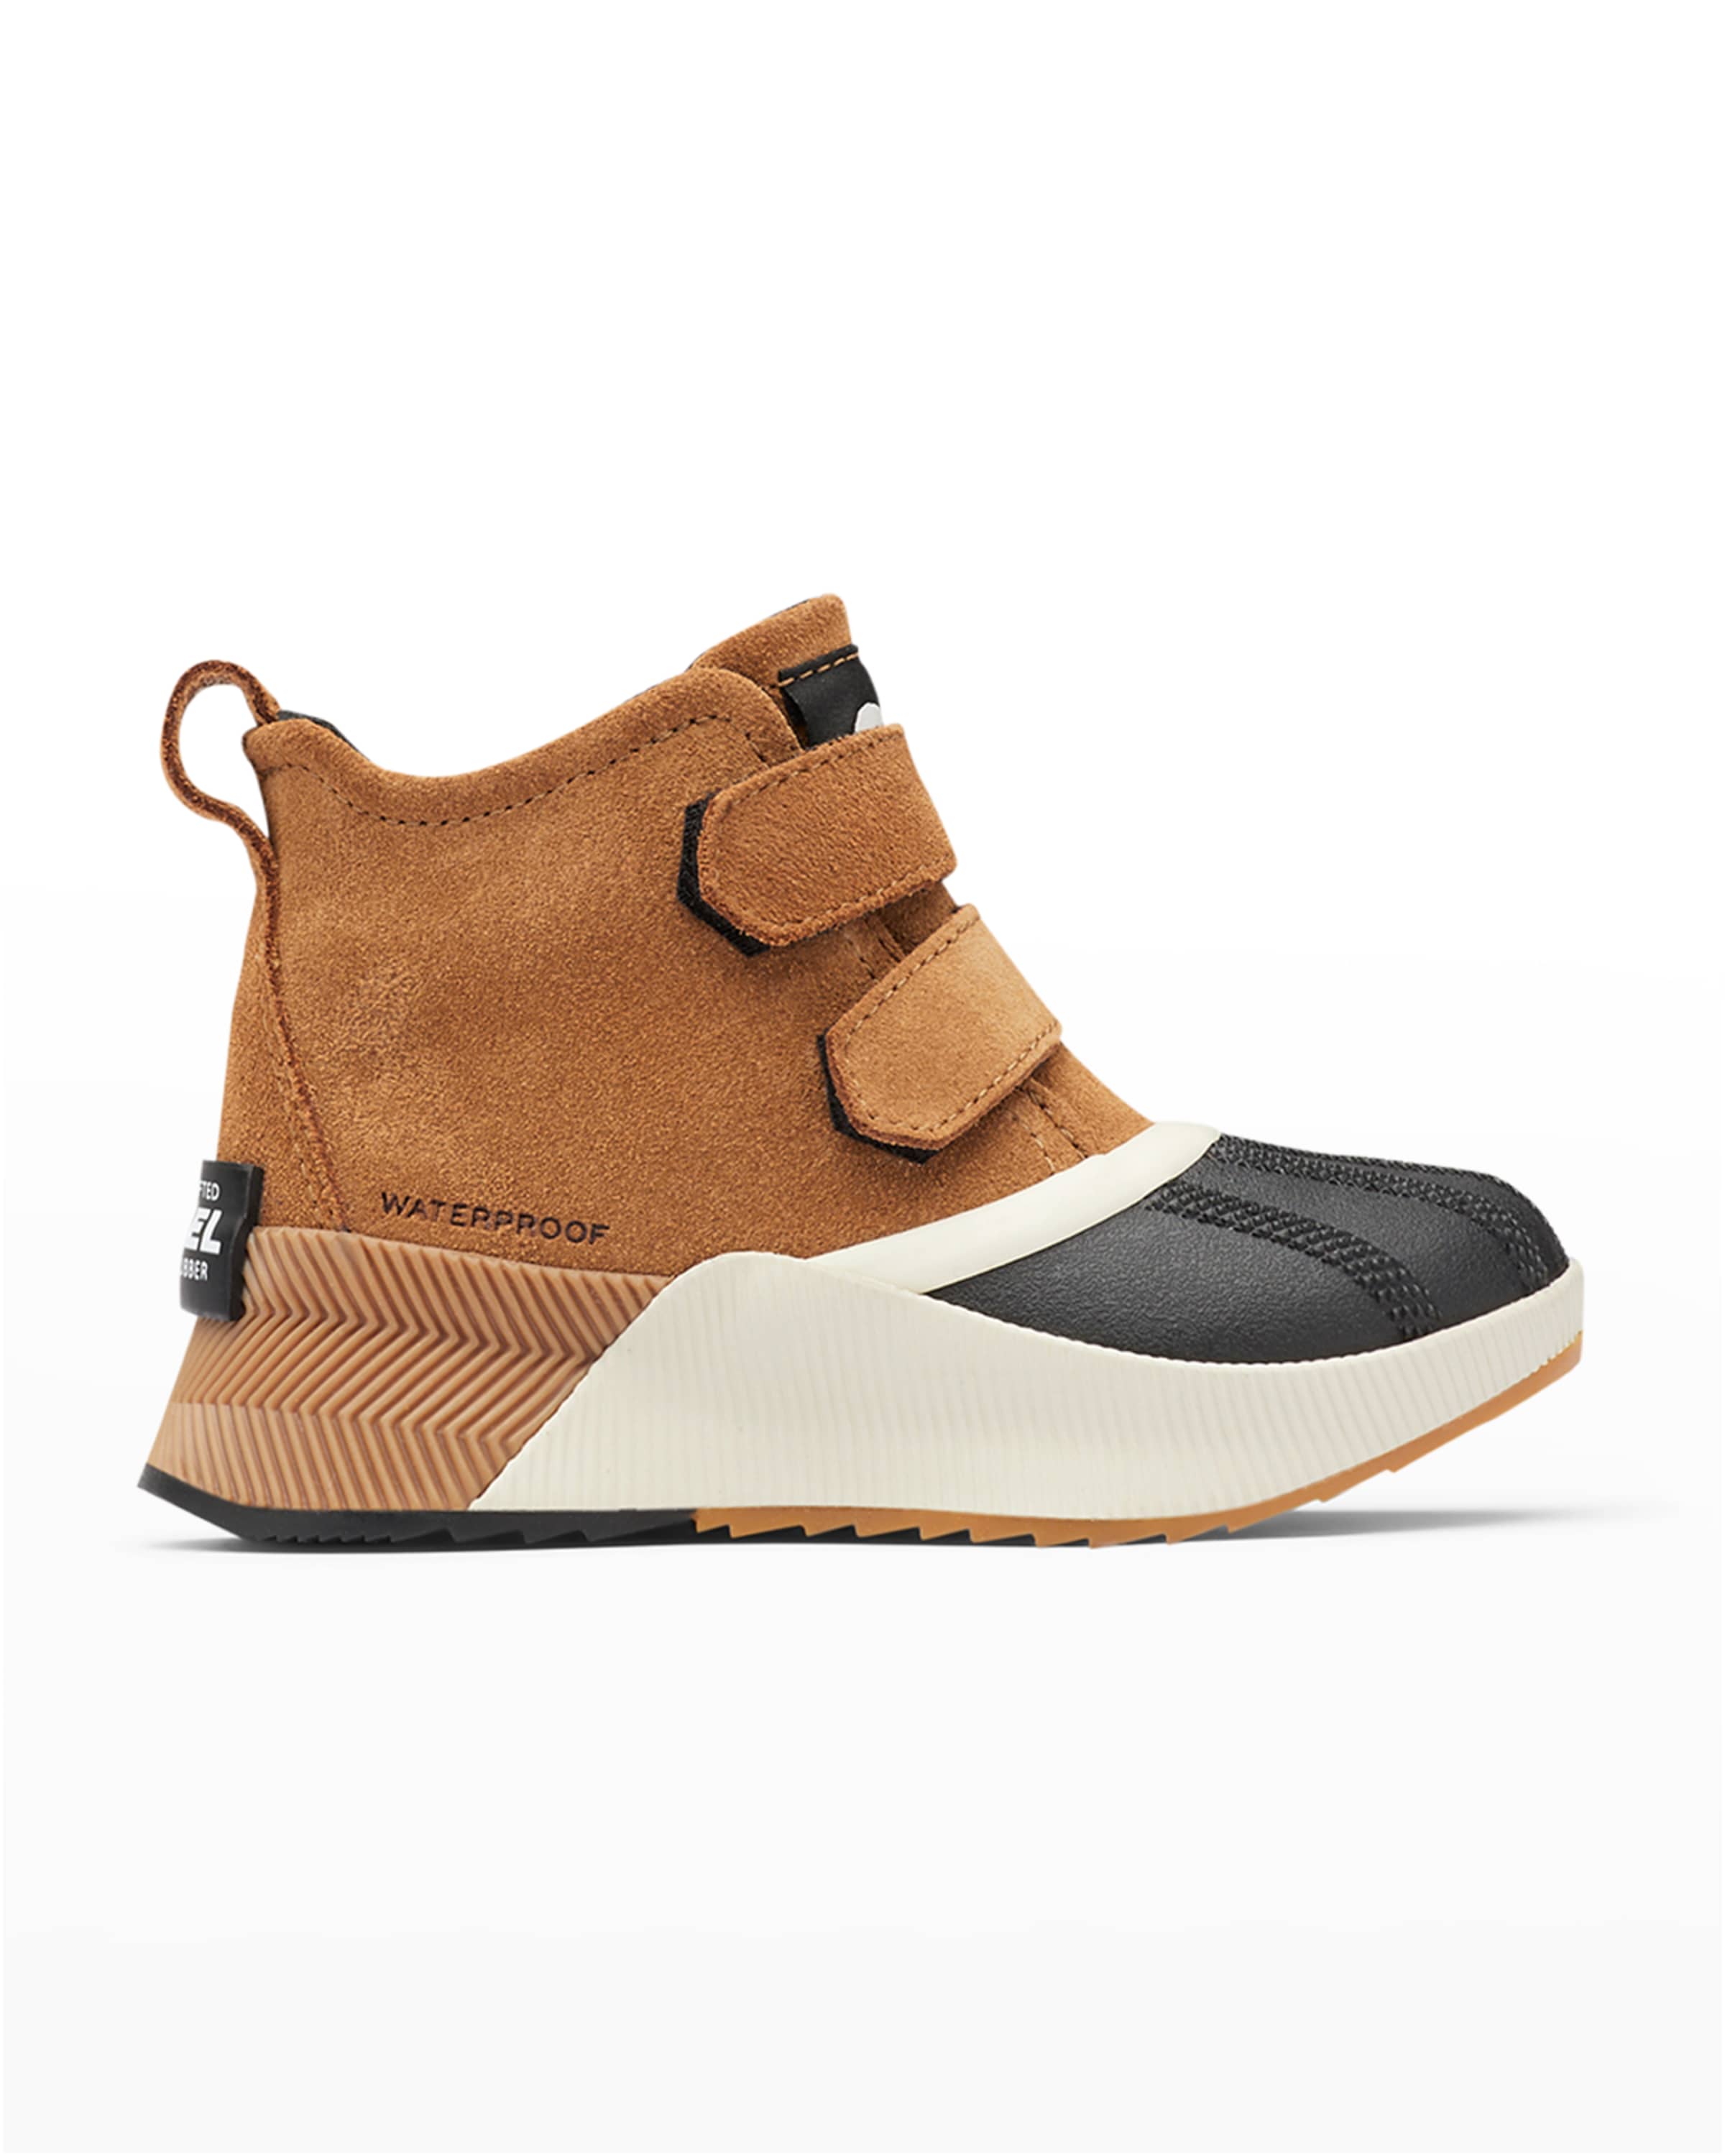 Out 'n About Kid's Waterproof Boot - Camel Brown